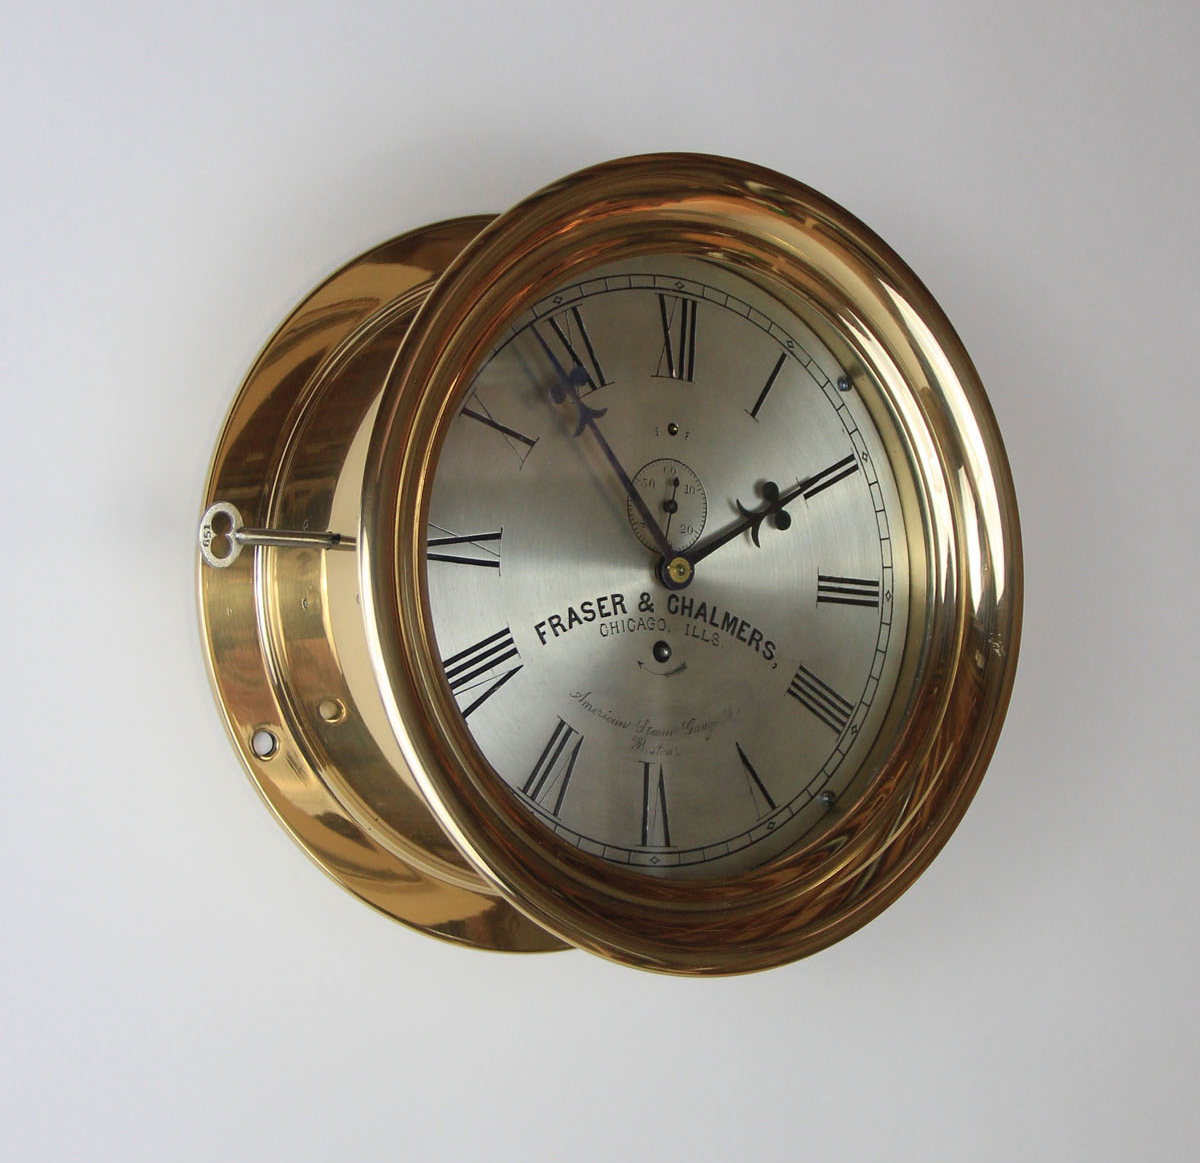 E. Howard 8 1/2 inch Marine Clock for Fraser Chalmers